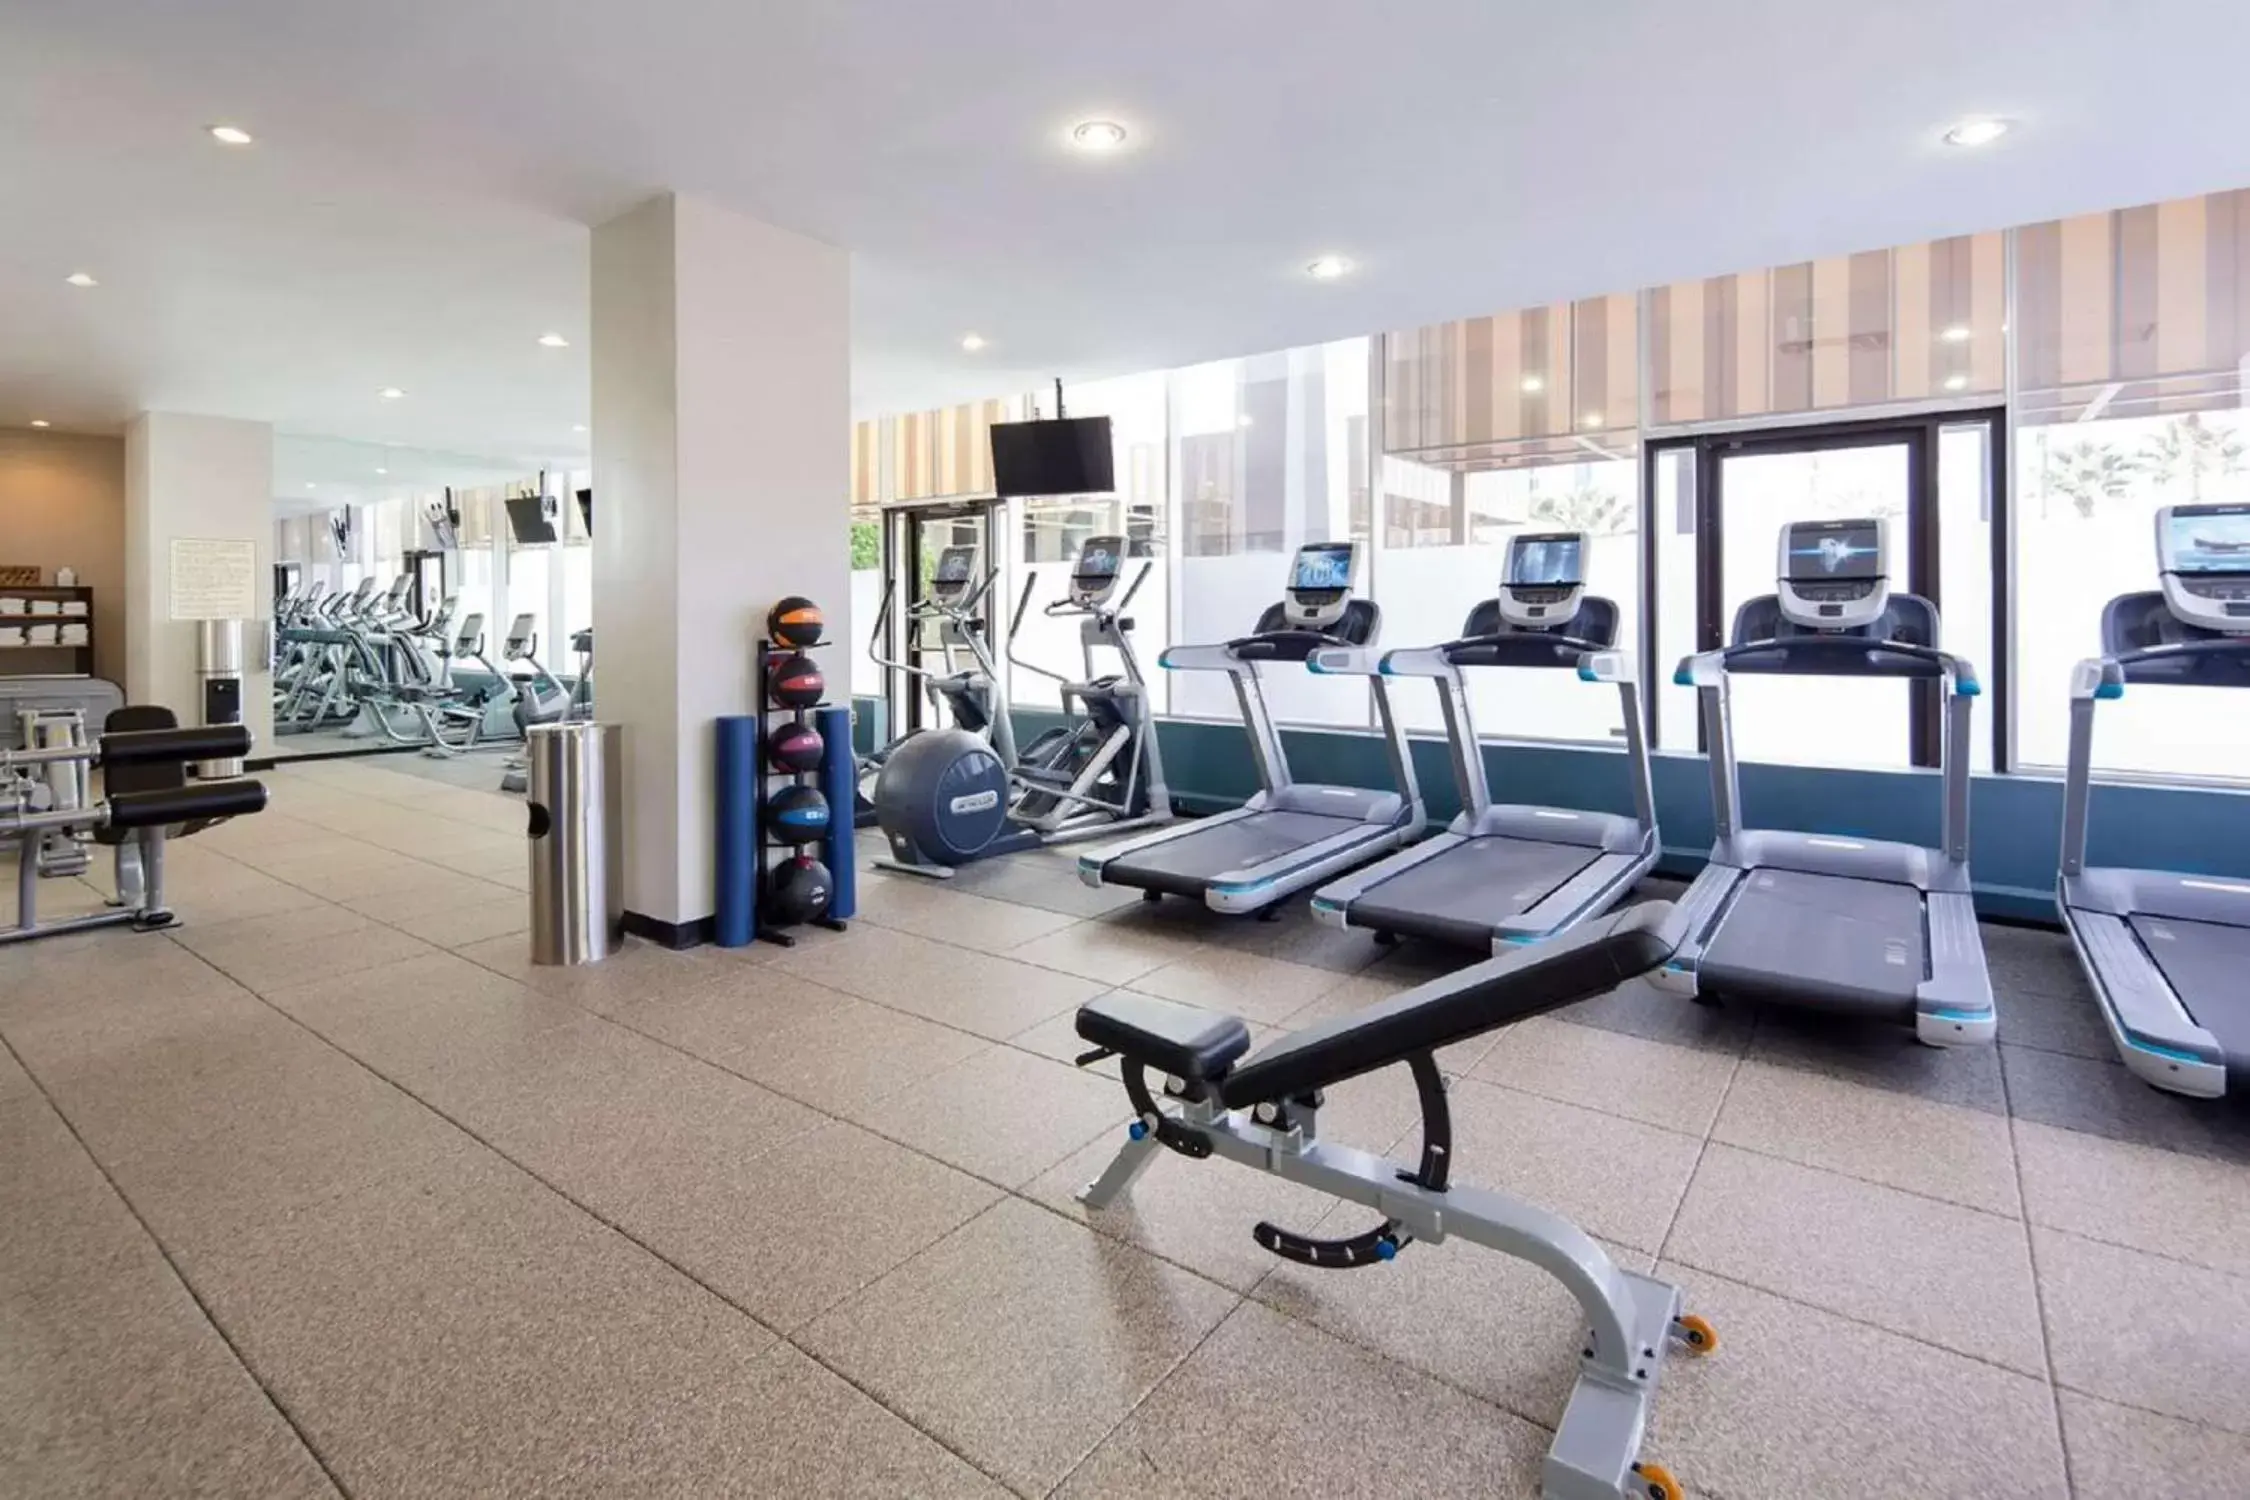 Fitness centre/facilities, Fitness Center/Facilities in DoubleTree by Hilton Jacksonville Riverfront, FL